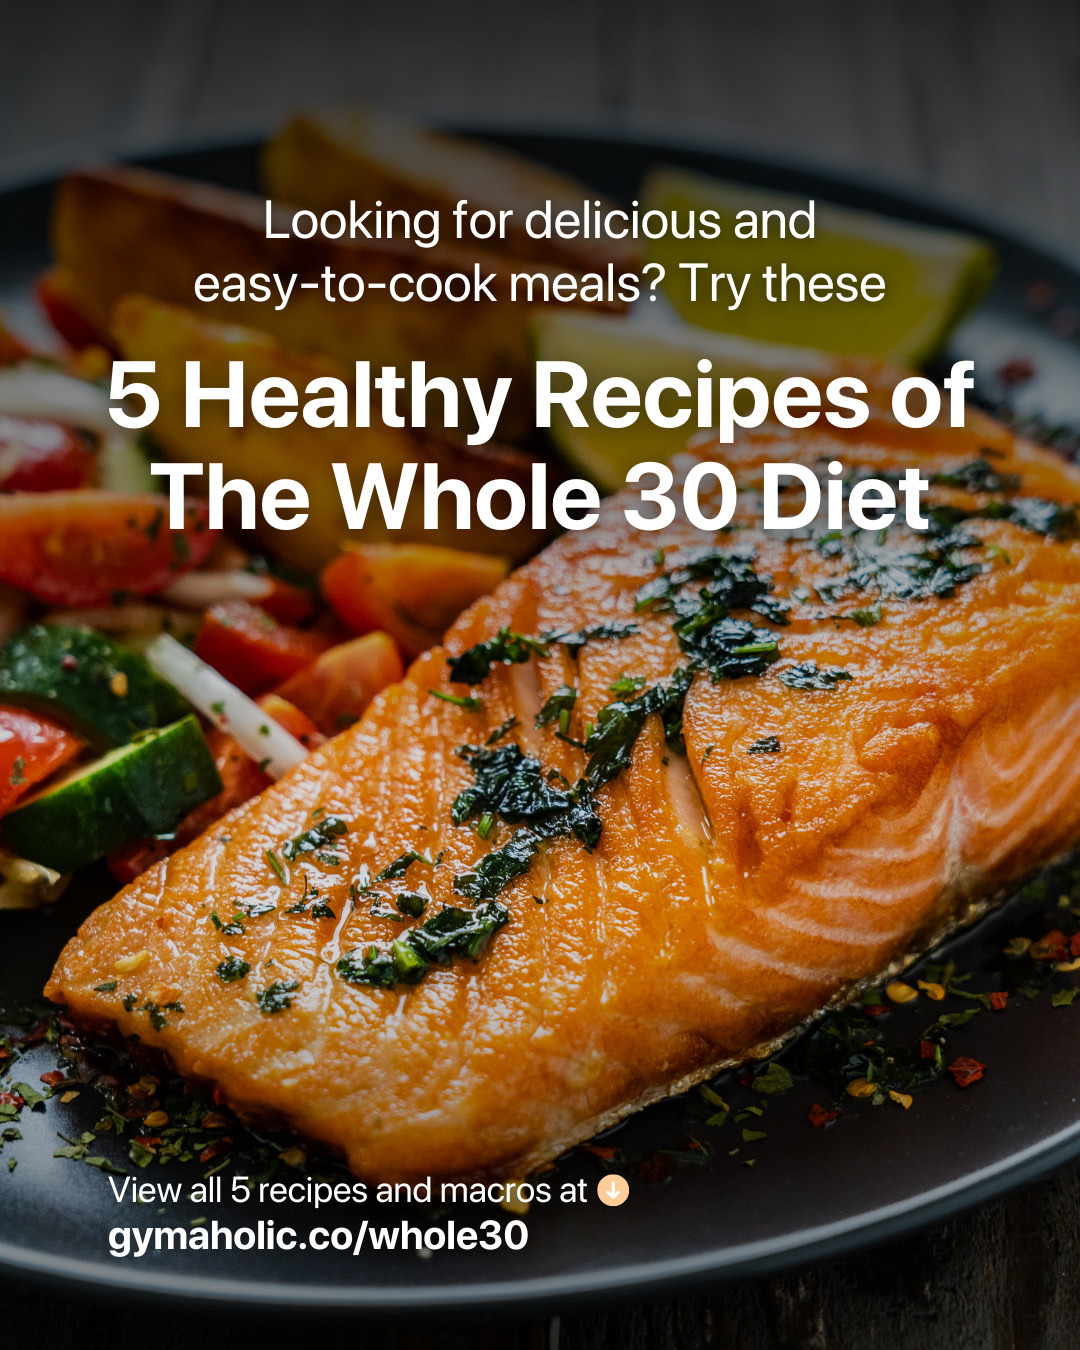 5 Healthy Recipes of The Whole 30 Diet